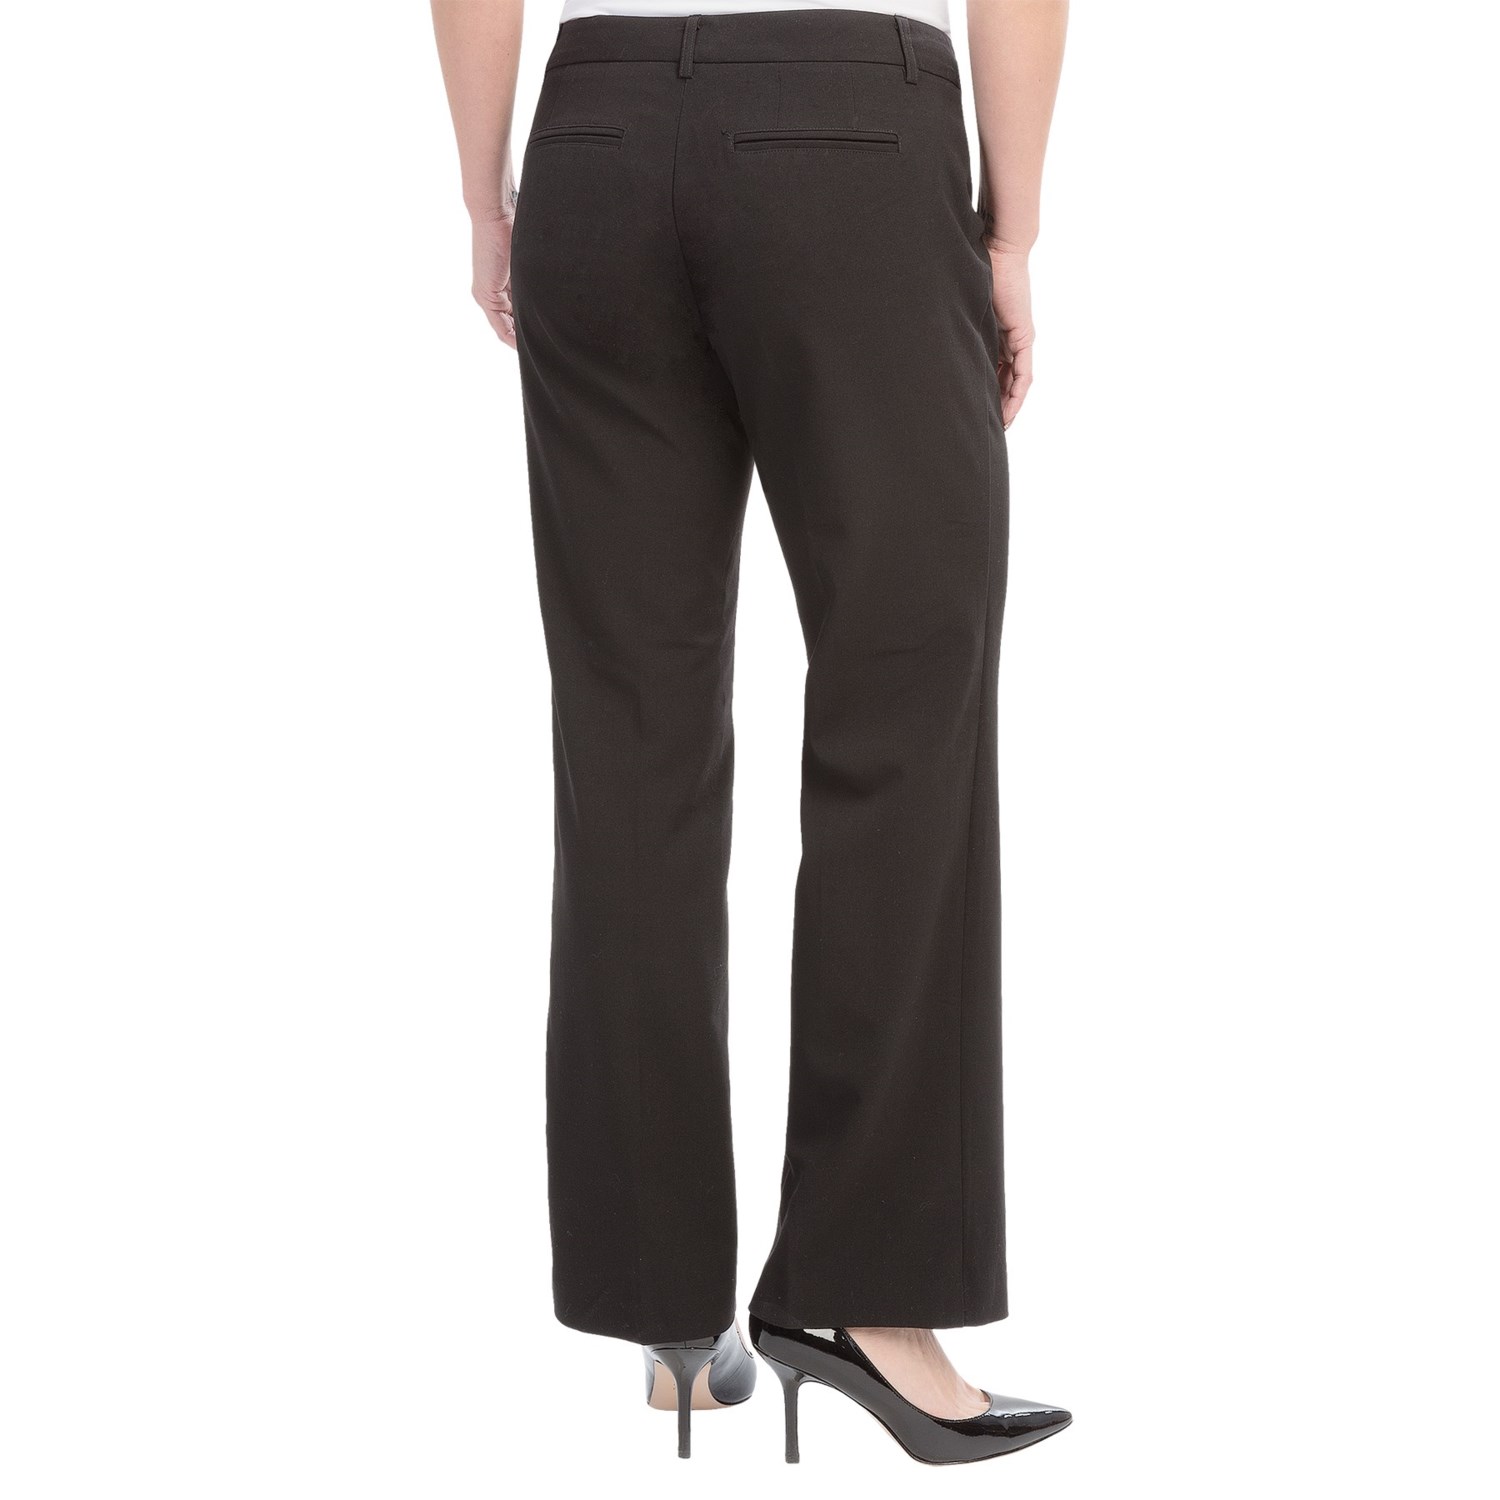 Stretch Dress Pants with Pockets (For Women) 8584C - Save 69%